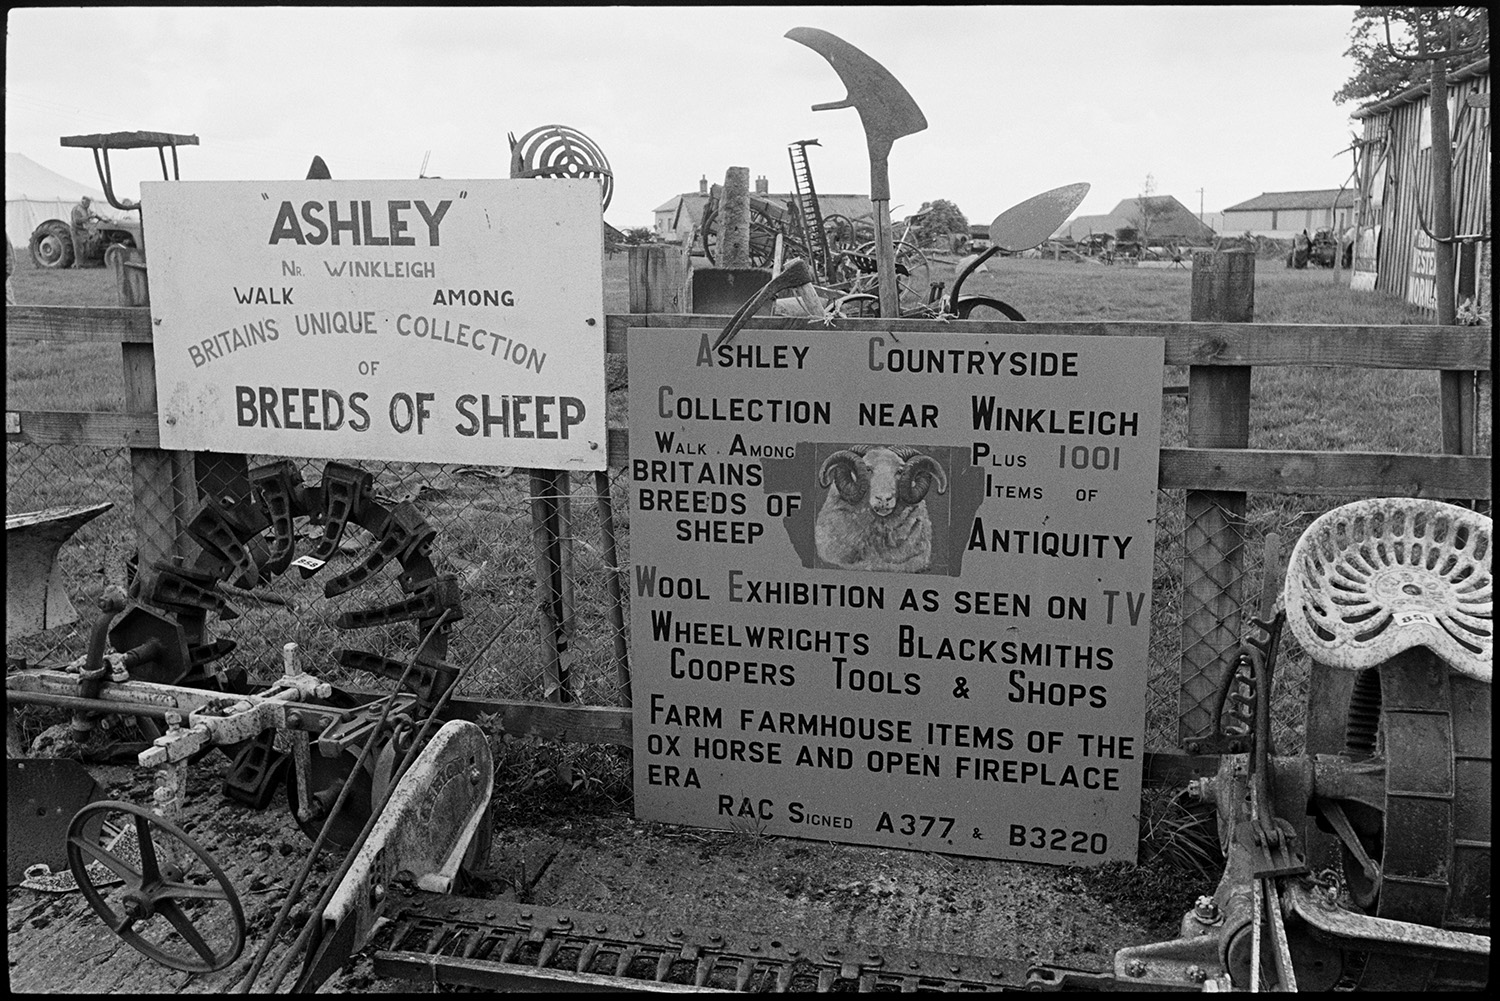 Sale of agricultural museum collection, signs, implements, machinery on display. Woodpile.
[Signs giving details of the attractions at the Ashley Countryside Collection, surrounded by old agricultural machinery.]